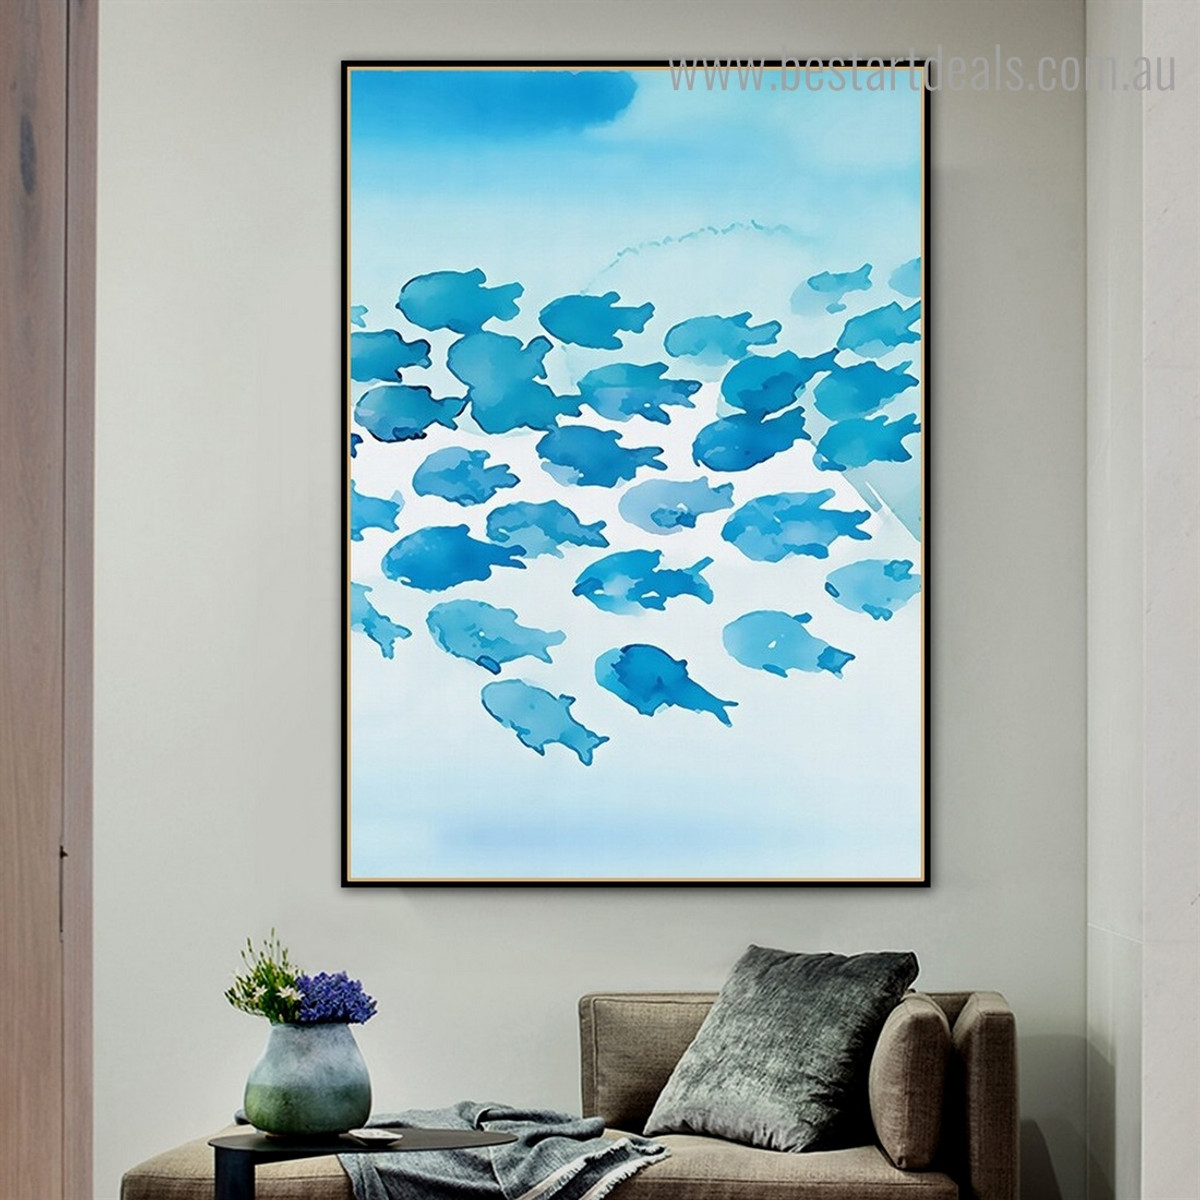 Blue Fishes Abstract Animal Kids Framed Artwork Picture Canvas Print for Room Wall Disposition
